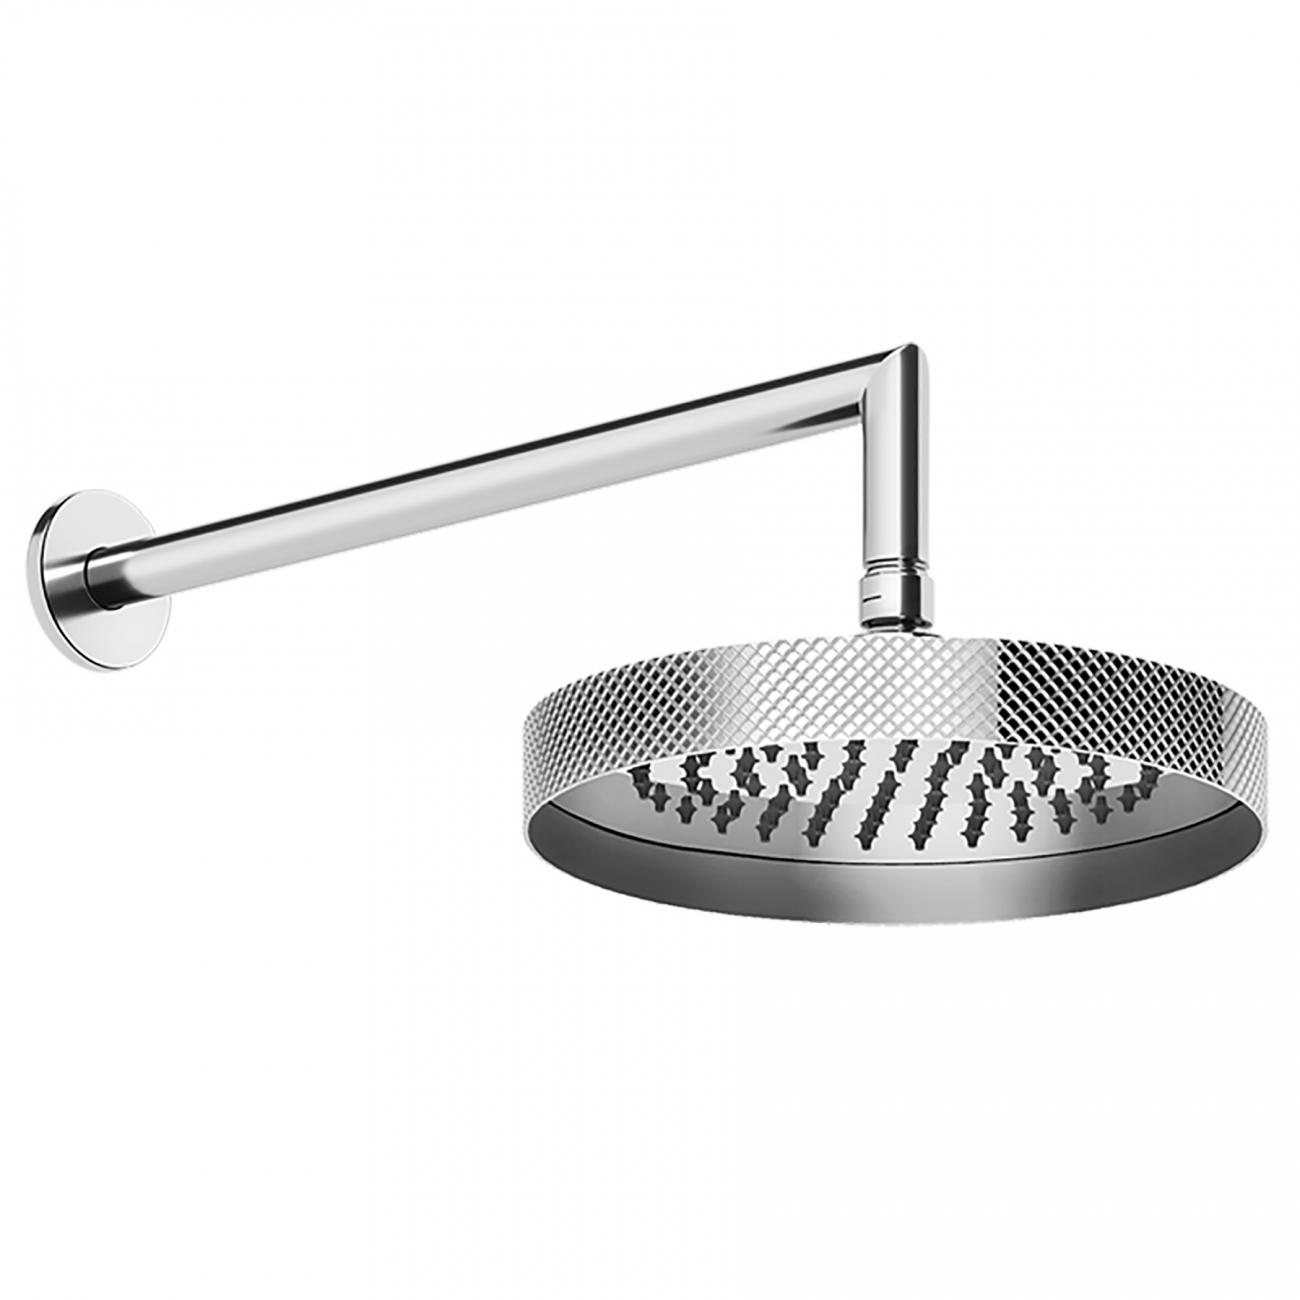 Gessi Anello wall-mounted showerhead